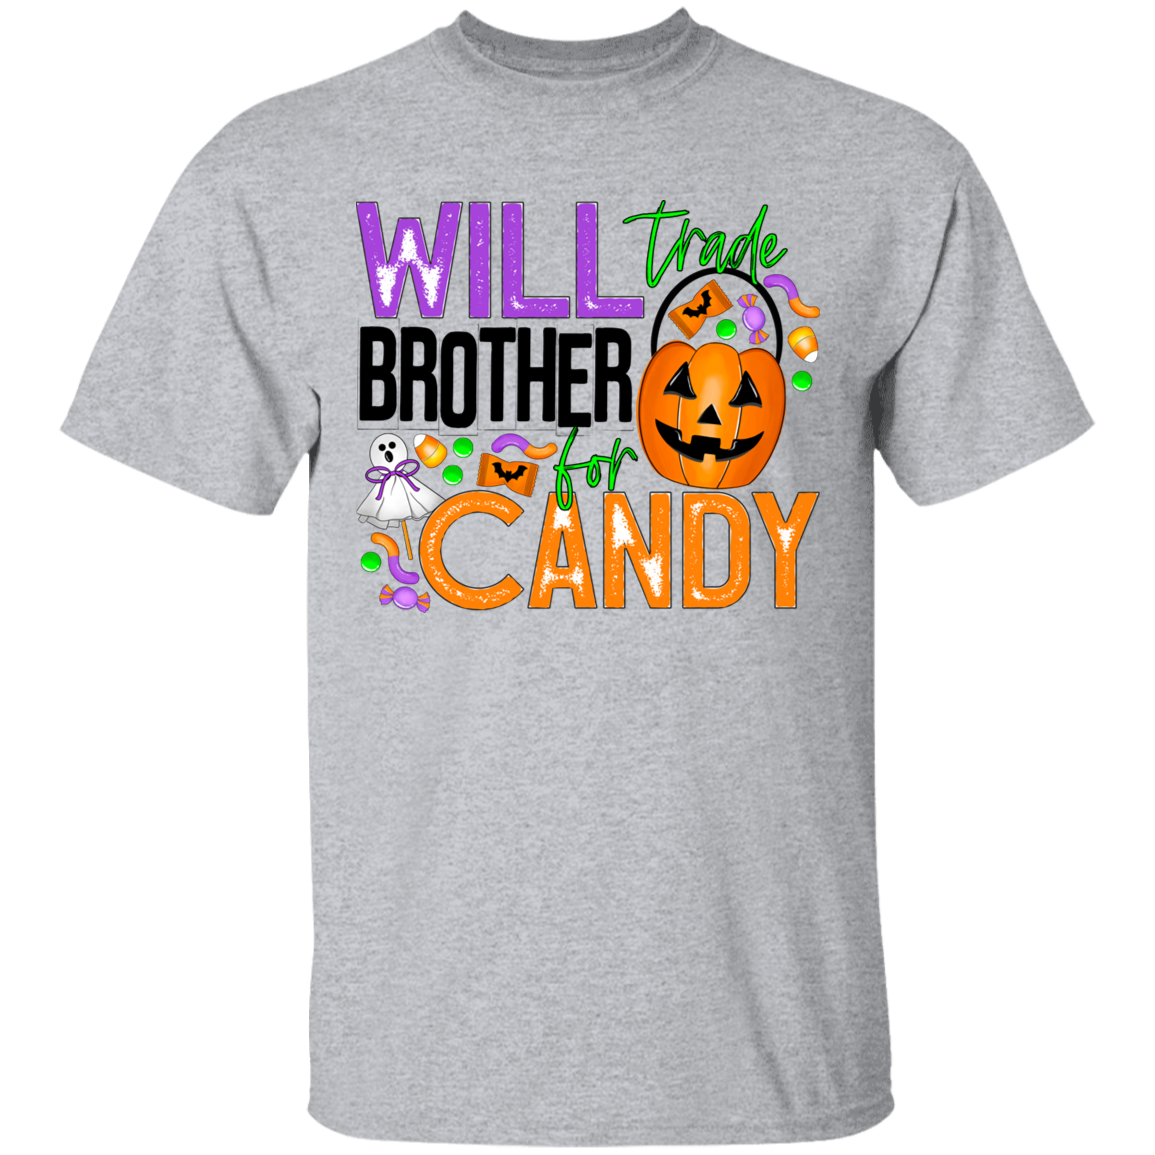 Trade Brother for Candy Youth T-Shirt